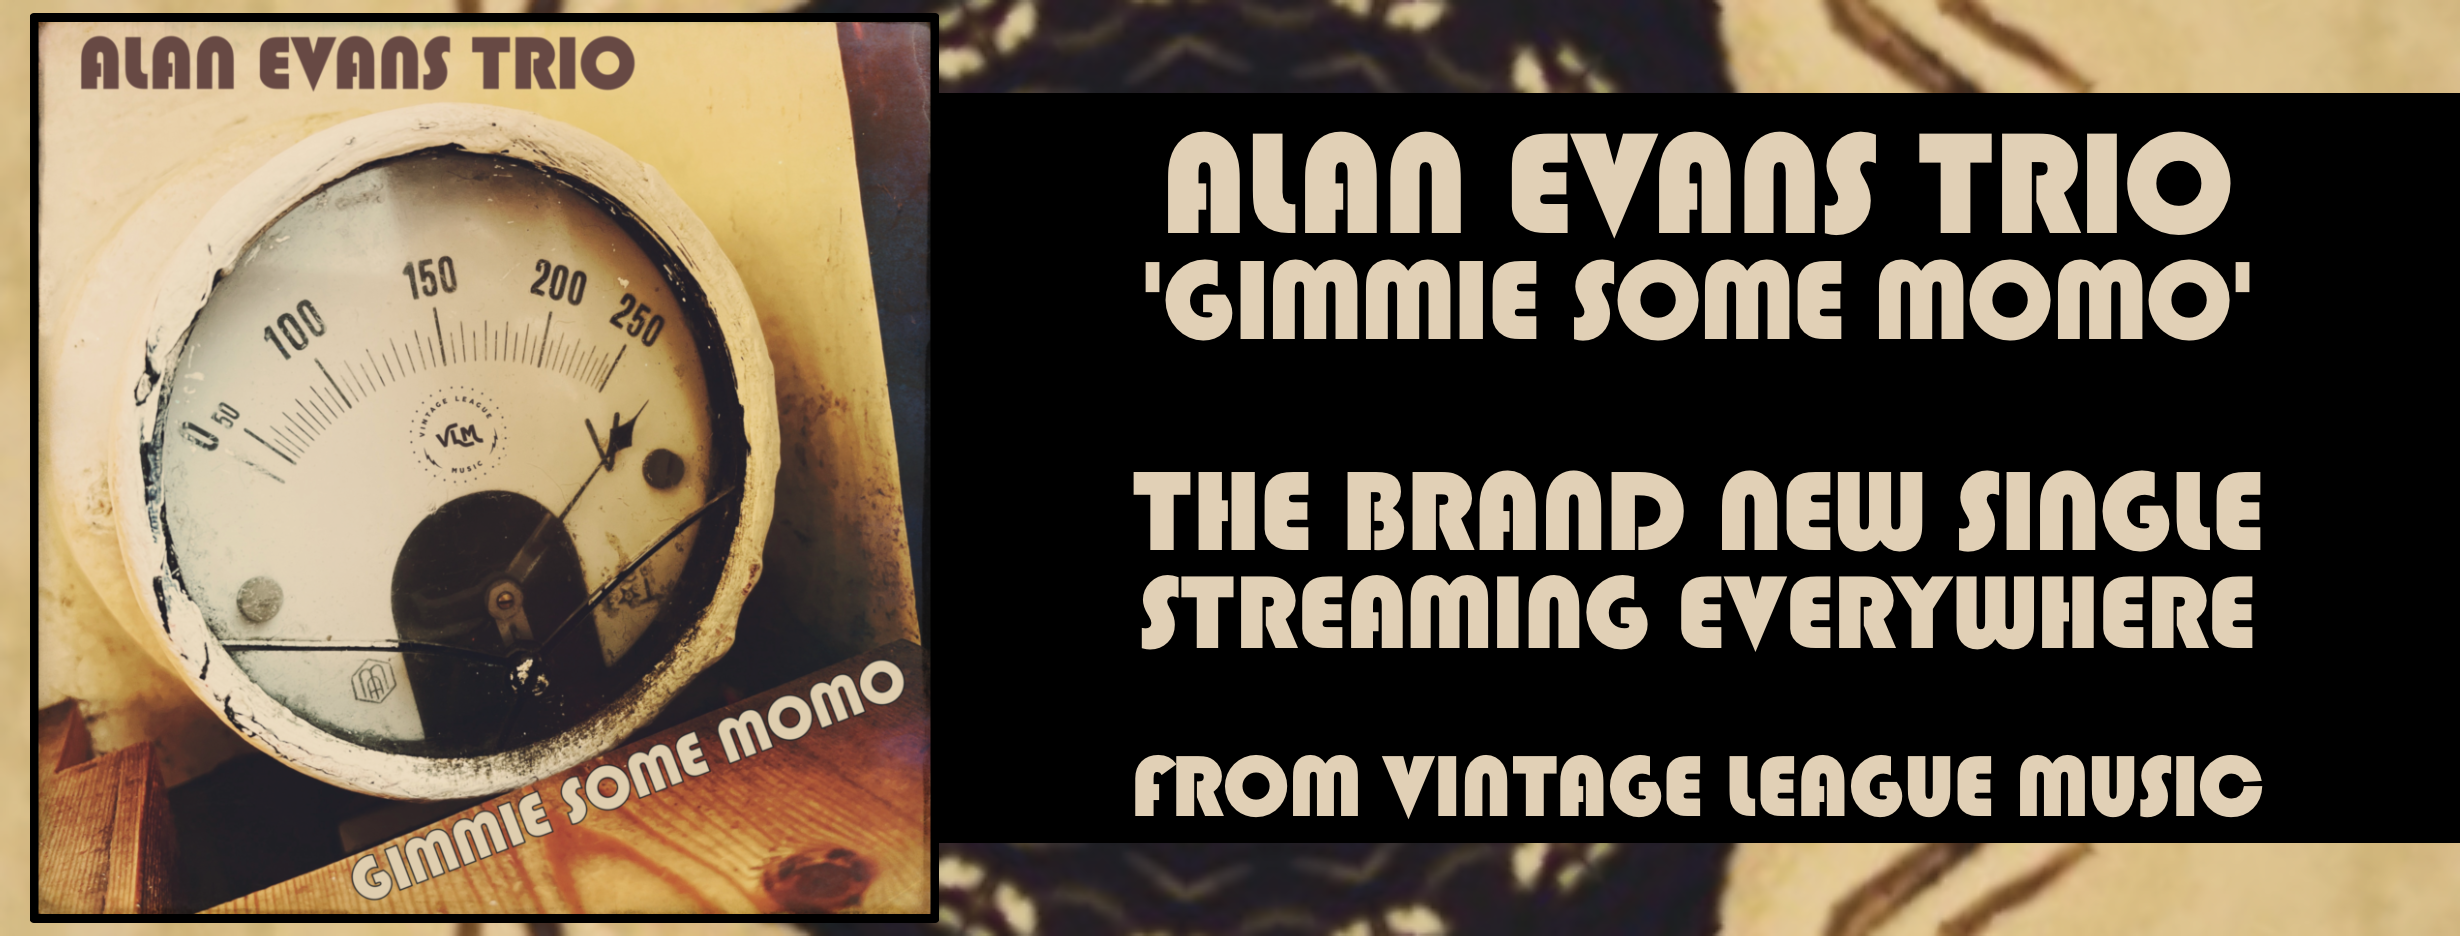 Alan Evans Trio - Gimmie Some Momo - banner@3x.png